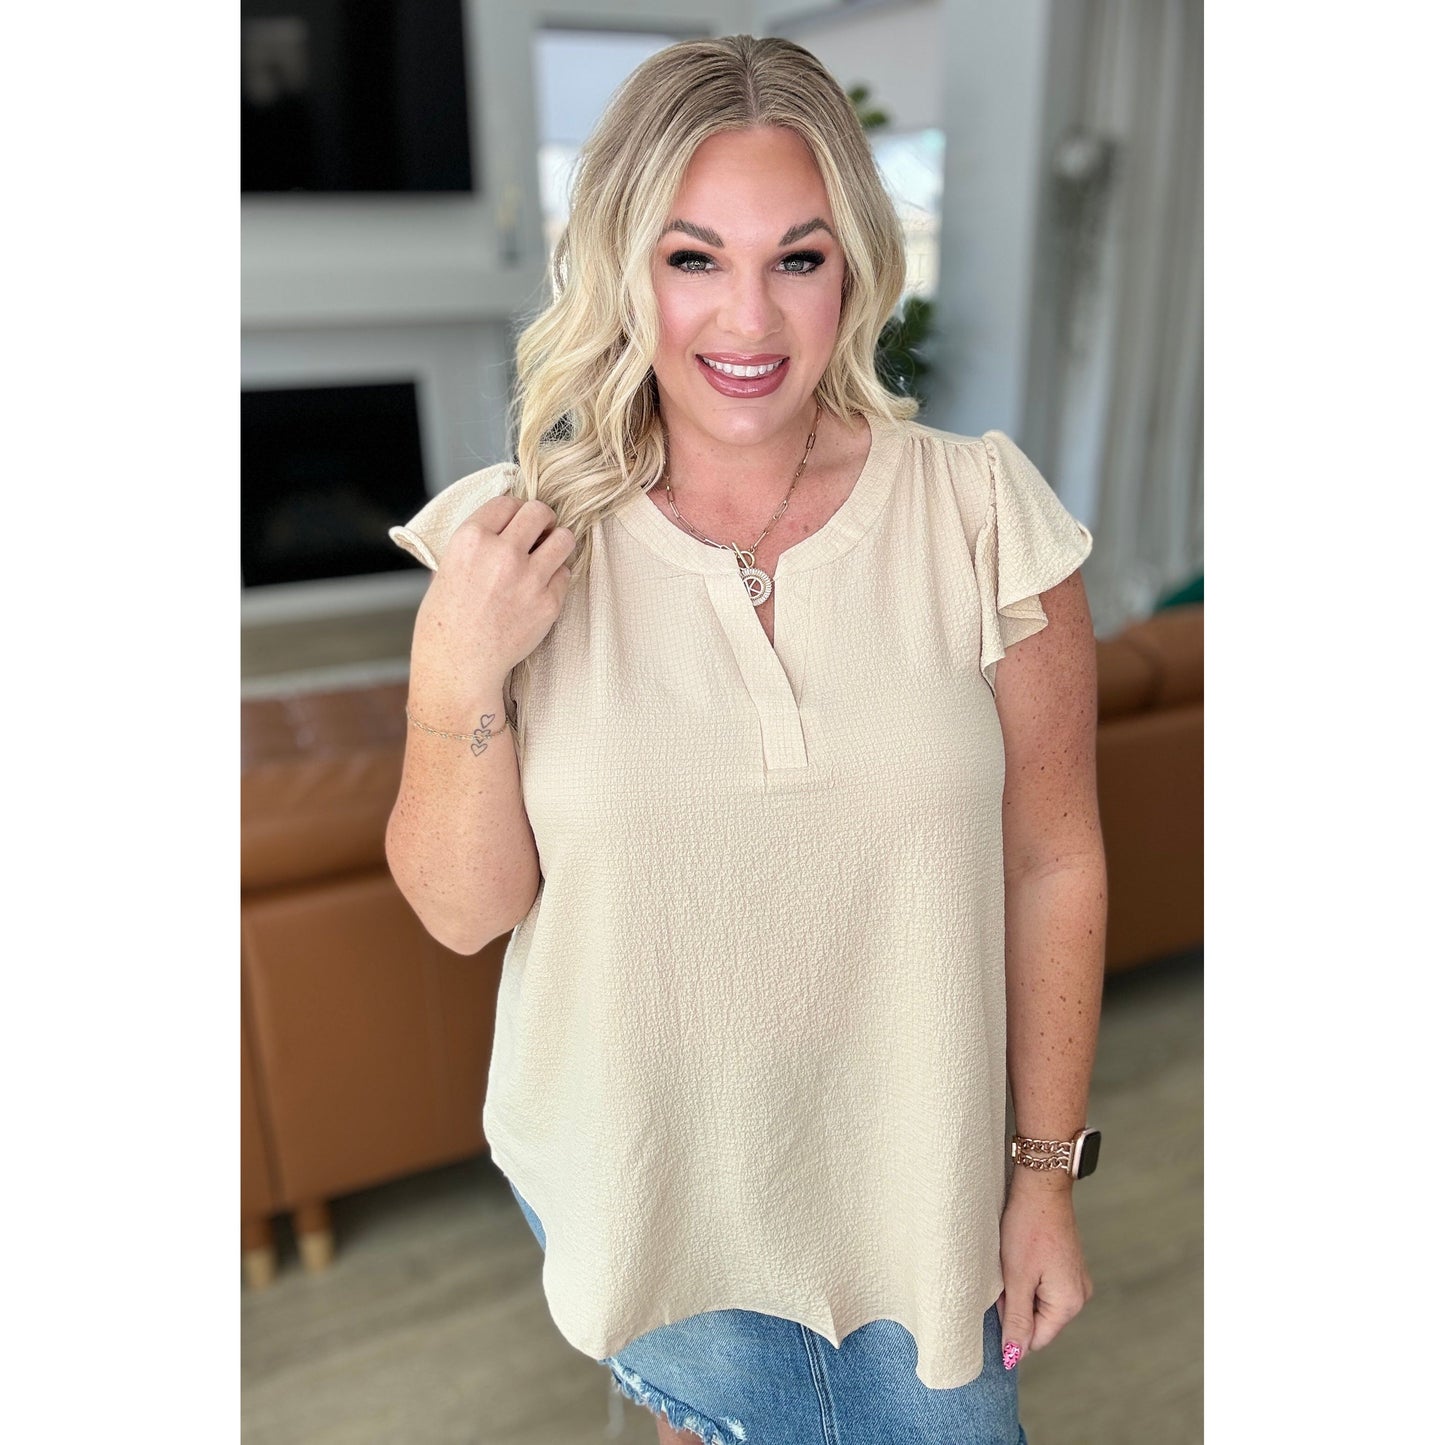 Crinkle Split Neckline Flutter Sleeve Top in Taupe - Rhapsody and Renascence -Tops - 1XL, 2XL, 3XL, 4-24-2024, Andree By Unit, Large, Medium, Small, XL